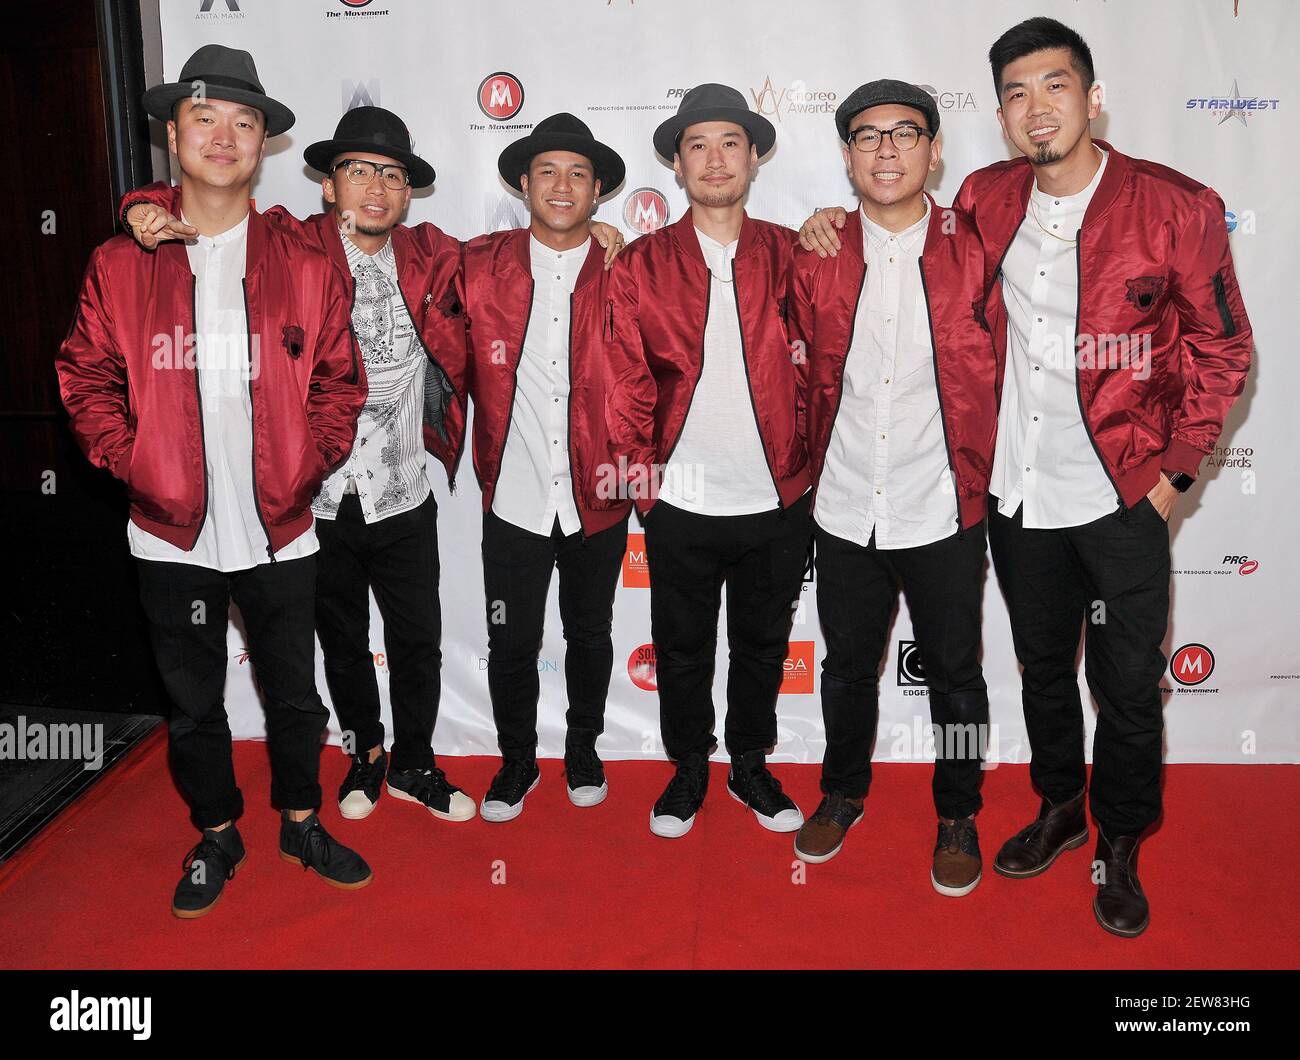 L-R) Kinjaz - Mike Song, Ben Chung, Bam Martin, Tony Tran, Charles Nguyen  and Anthony Lee at the 7th Annual World Choreography Awards held at The  Saban Theater in Beverly Hills, CA